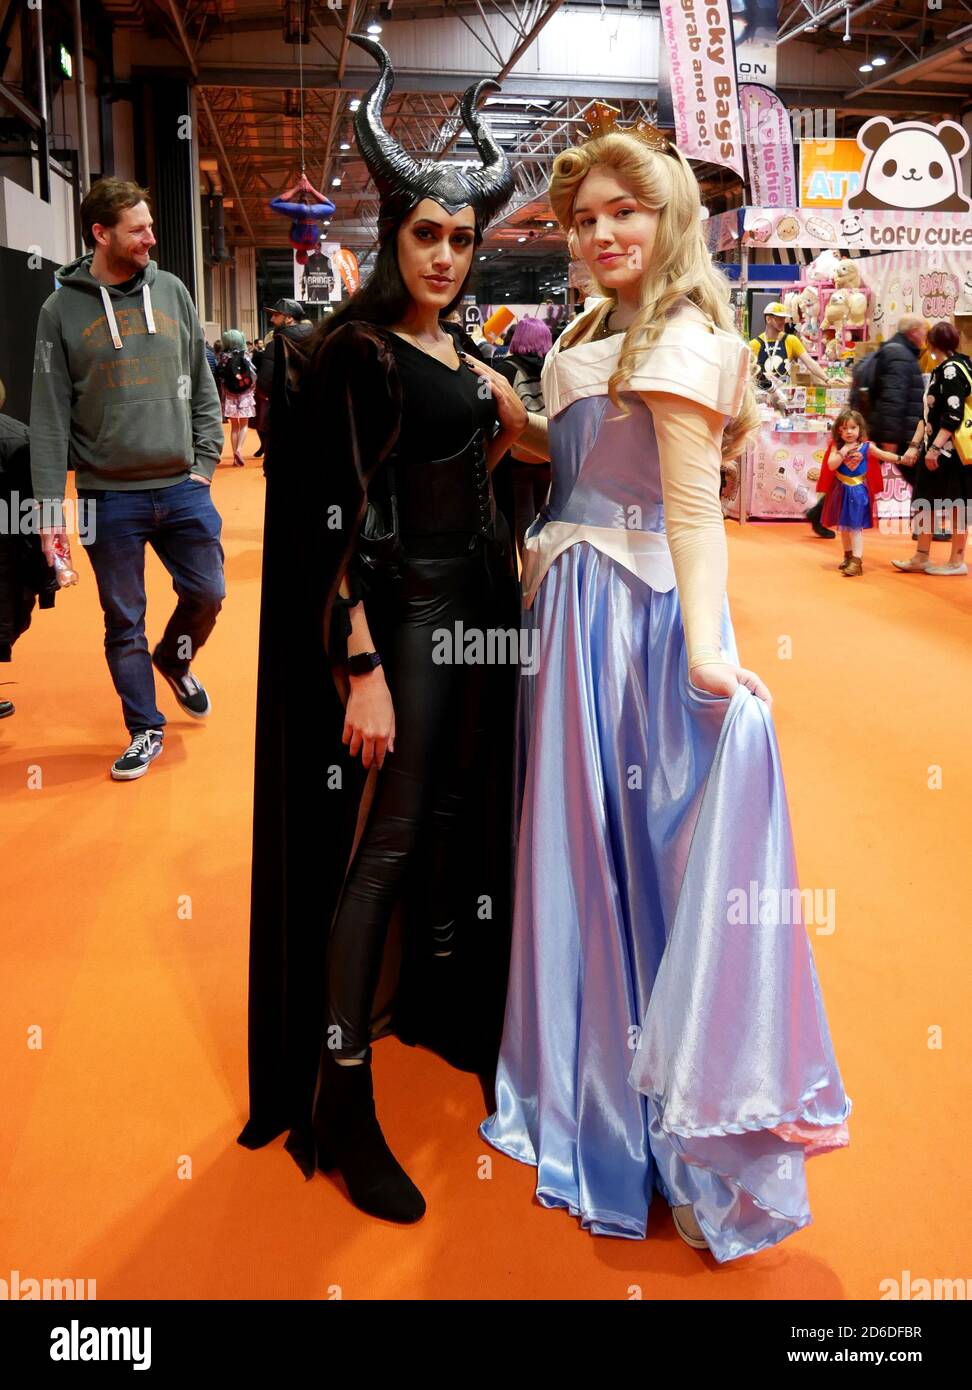 Cosplayers dressed as Maleficent and Princess Aurora from the Disney movie Sleeping Beauty during the MCM Comic Con held at the NEC Birmingham Stock Photo